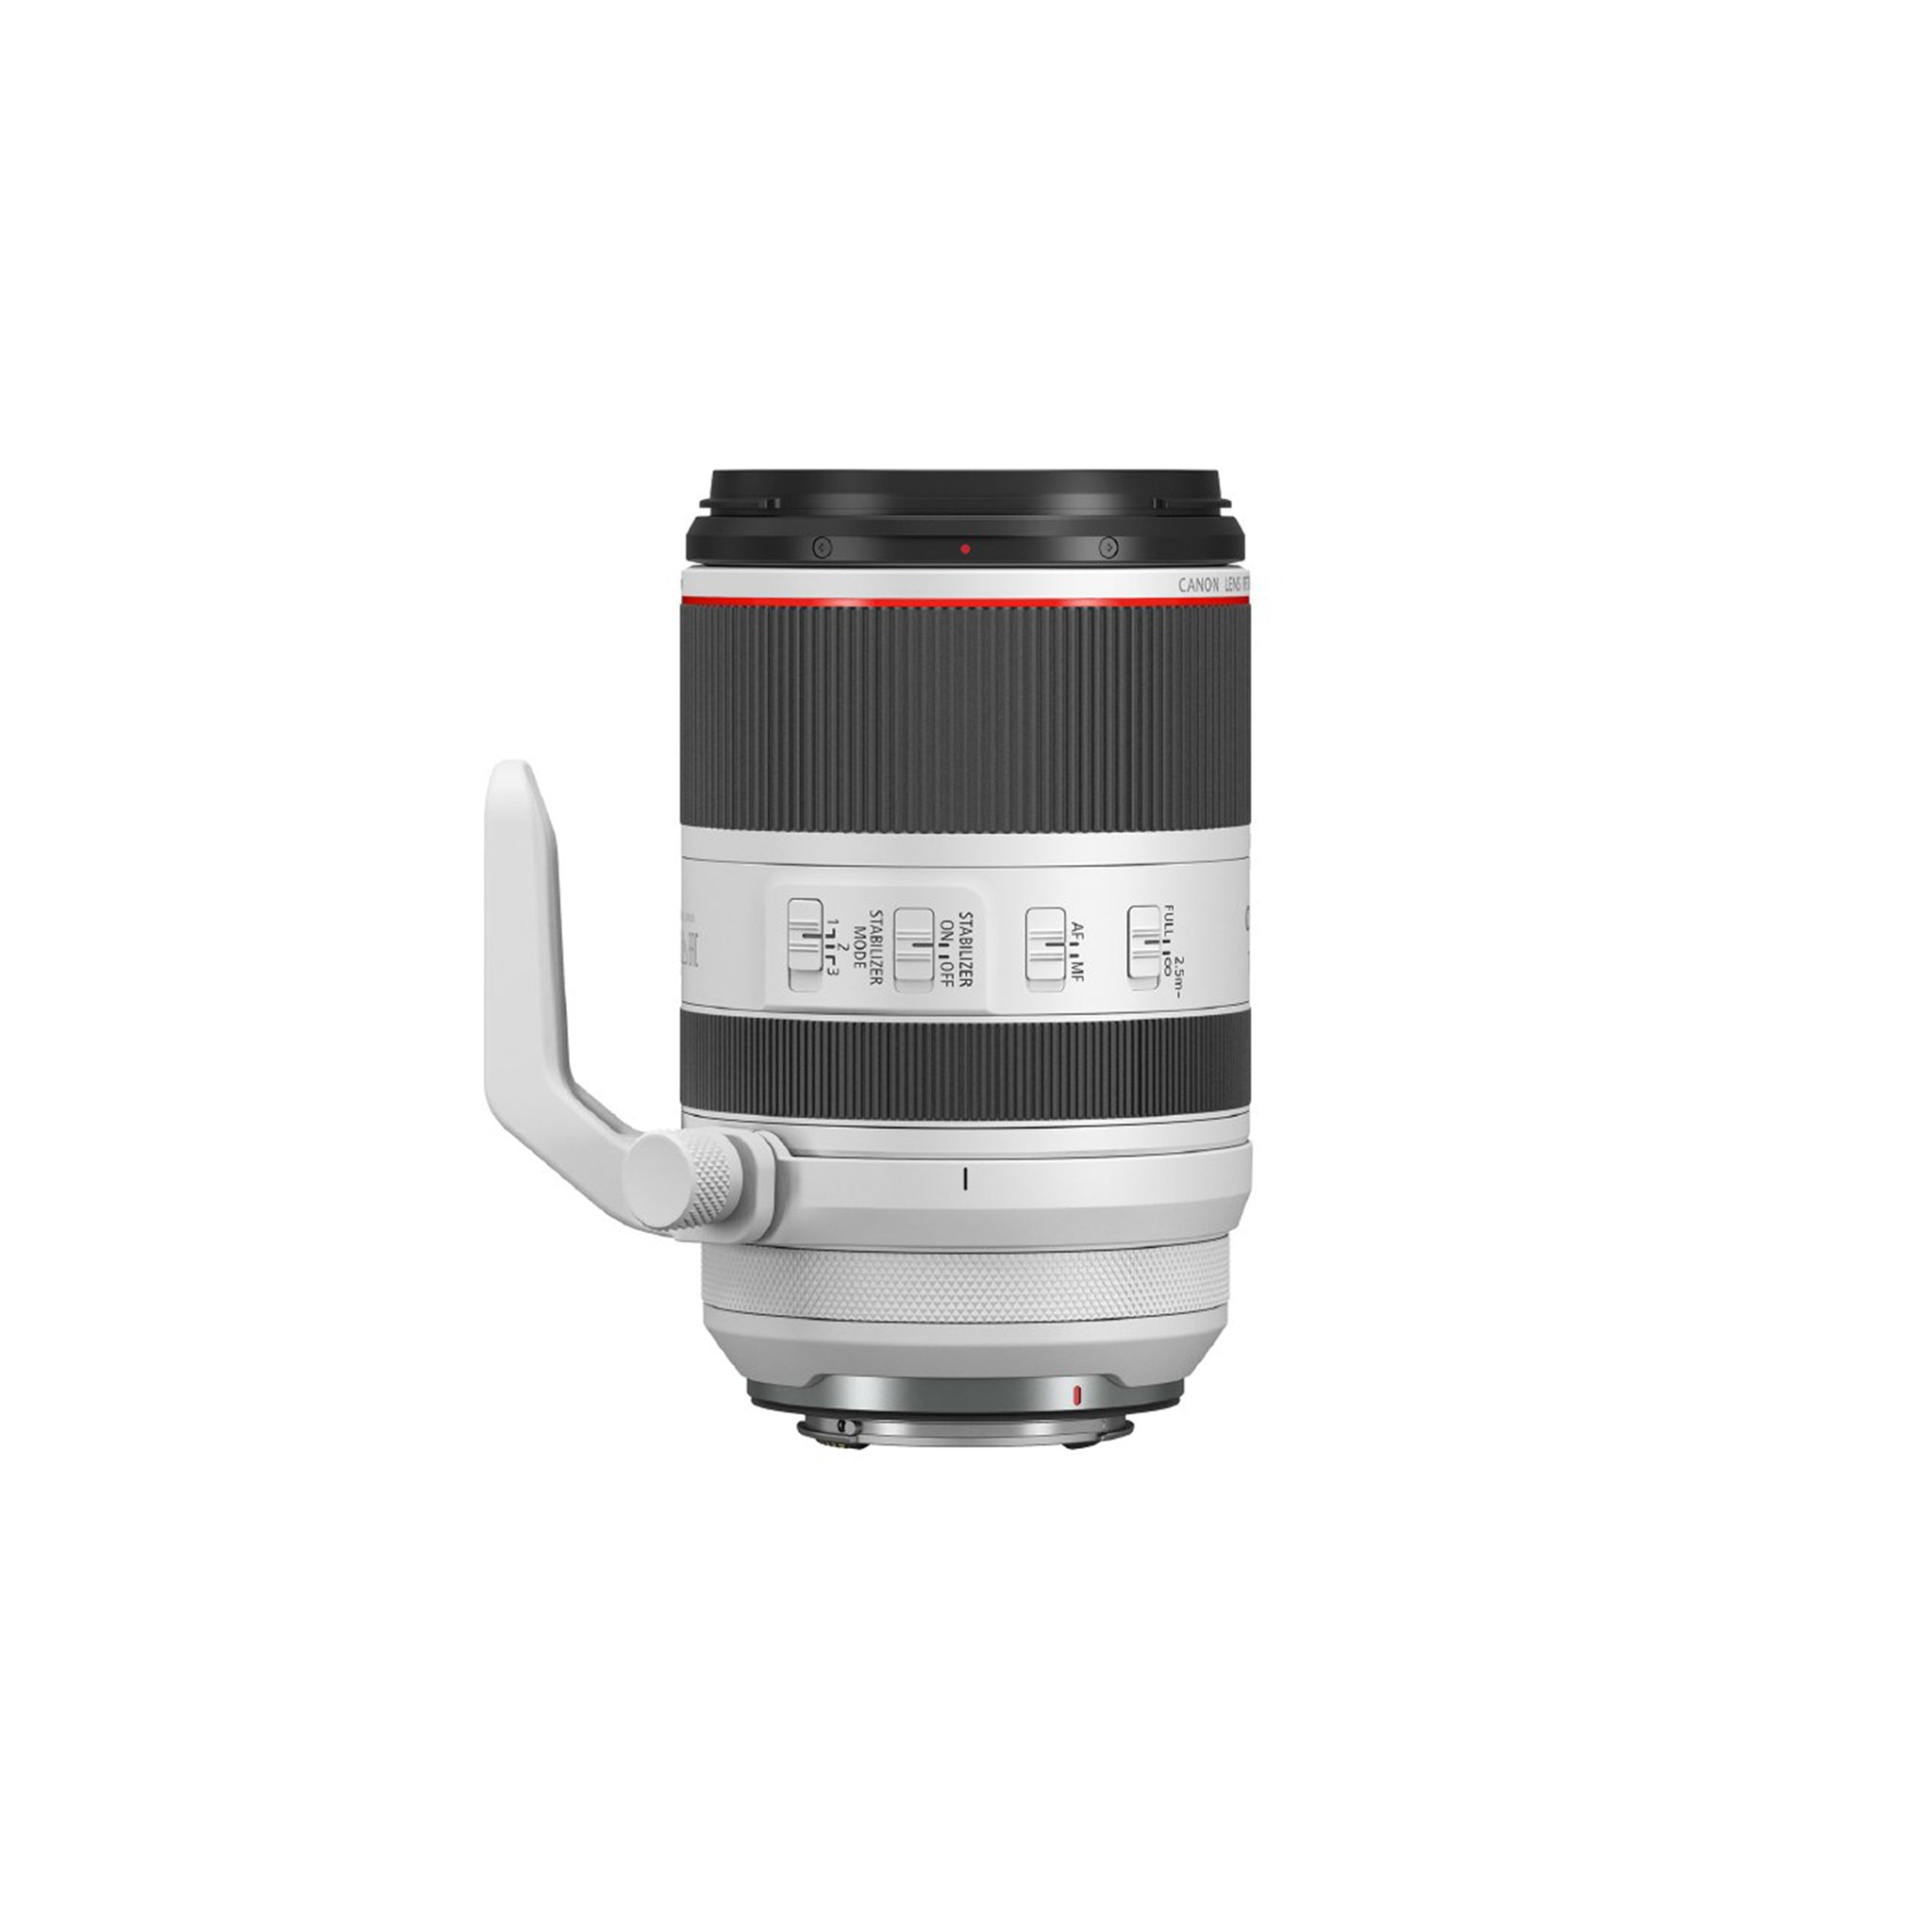 Canon RF 70-200mm F2.8L IS USM Lens